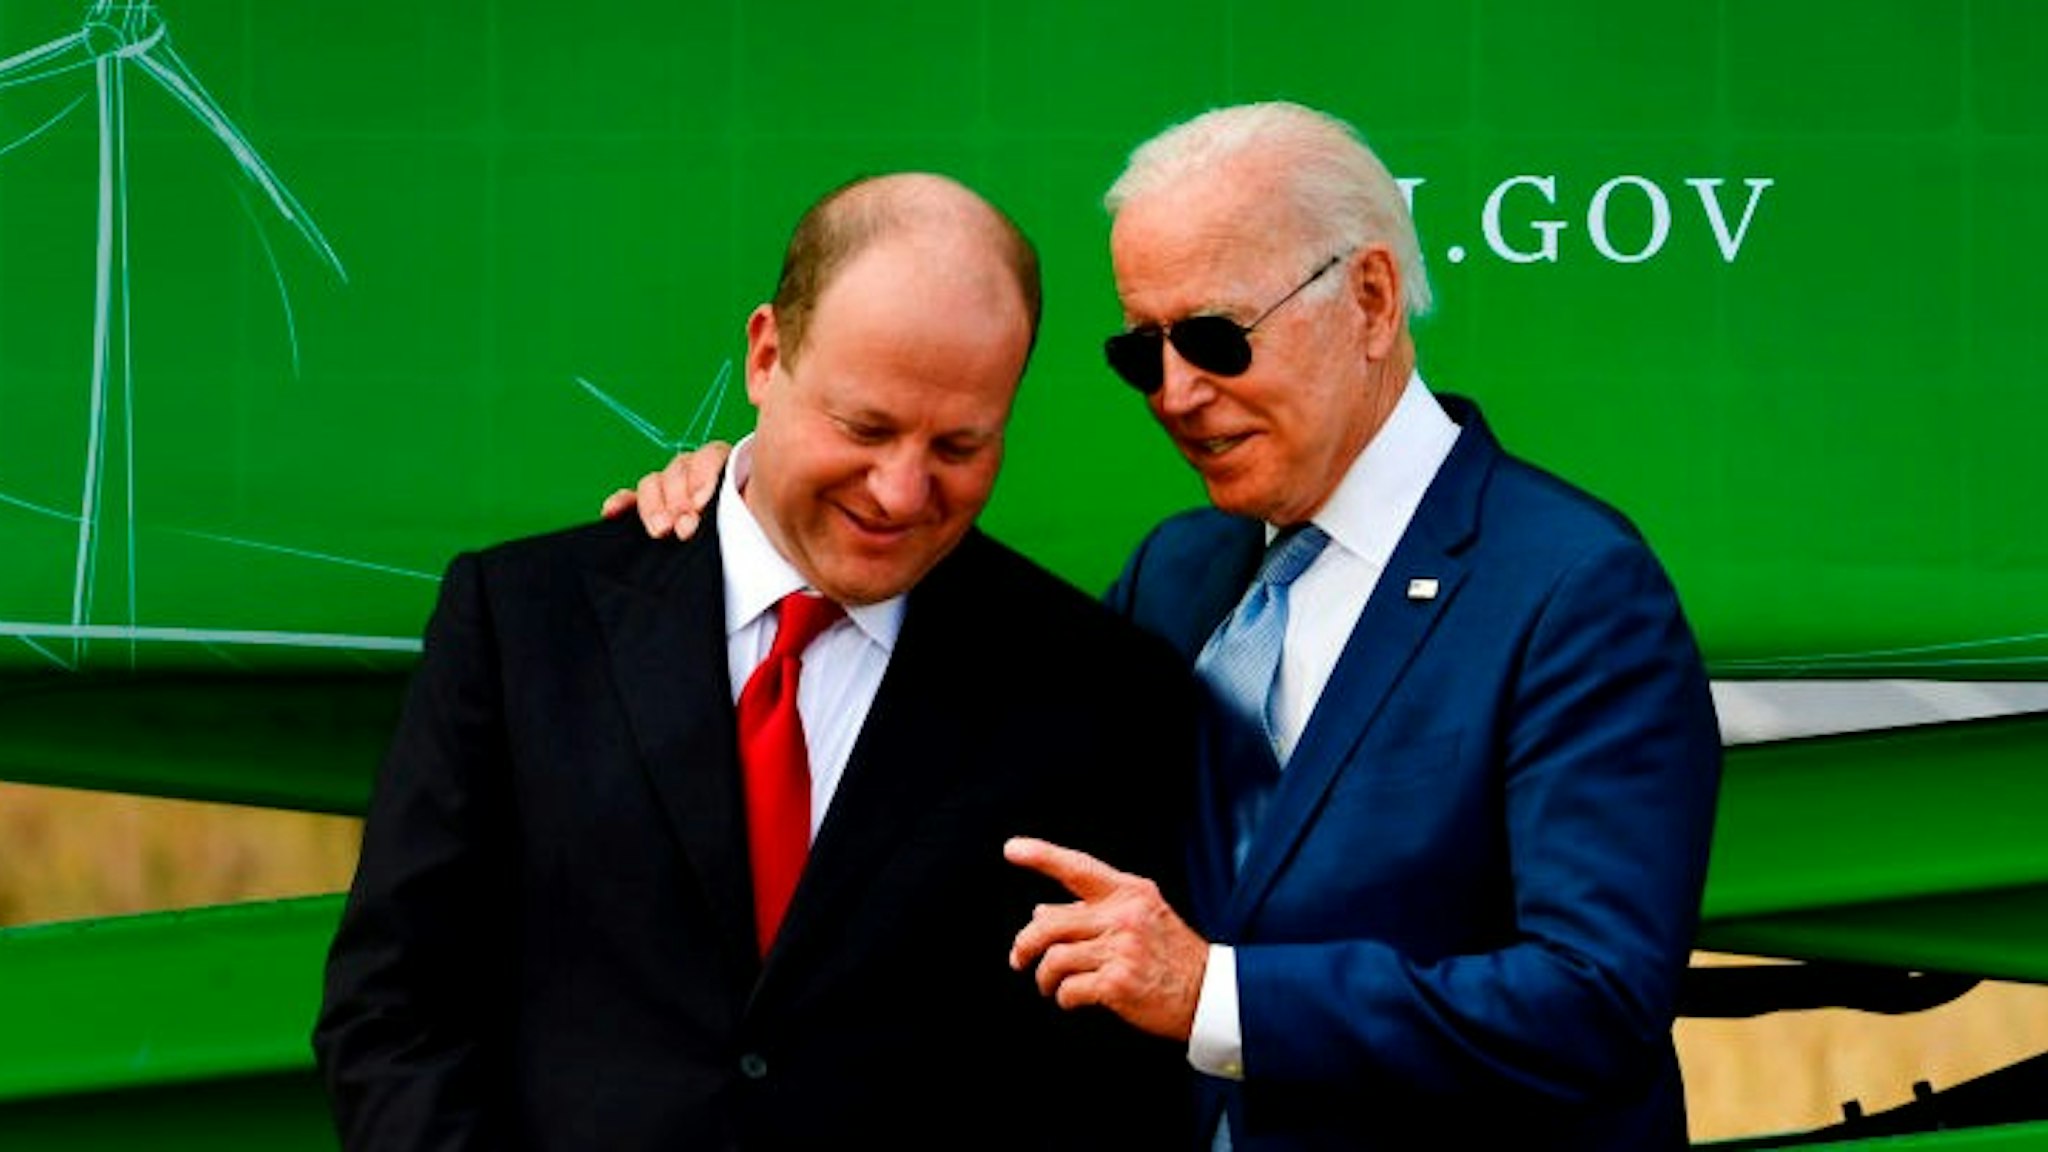 ARVADA, CO - SEPTEMBER 14: President Joe Biden, right, speaks with Colorado Governor Jared Polis before making remarks during a press conference on the grounds of National Renewable Energy Laboratory (NREL) on September 14, 2021 in Arvada, Colorado. Biden was in Colorado to visit NREL and to deliver remarks underscoring how the investments in his Bipartisan Infrastructure Deal and Build Back Better Agenda will help tackle the climate crisis, modernize our infrastructure and strengthen our country's resilience while creating good-paying jobs, union jobs and advancing environmental justice. (Photo by